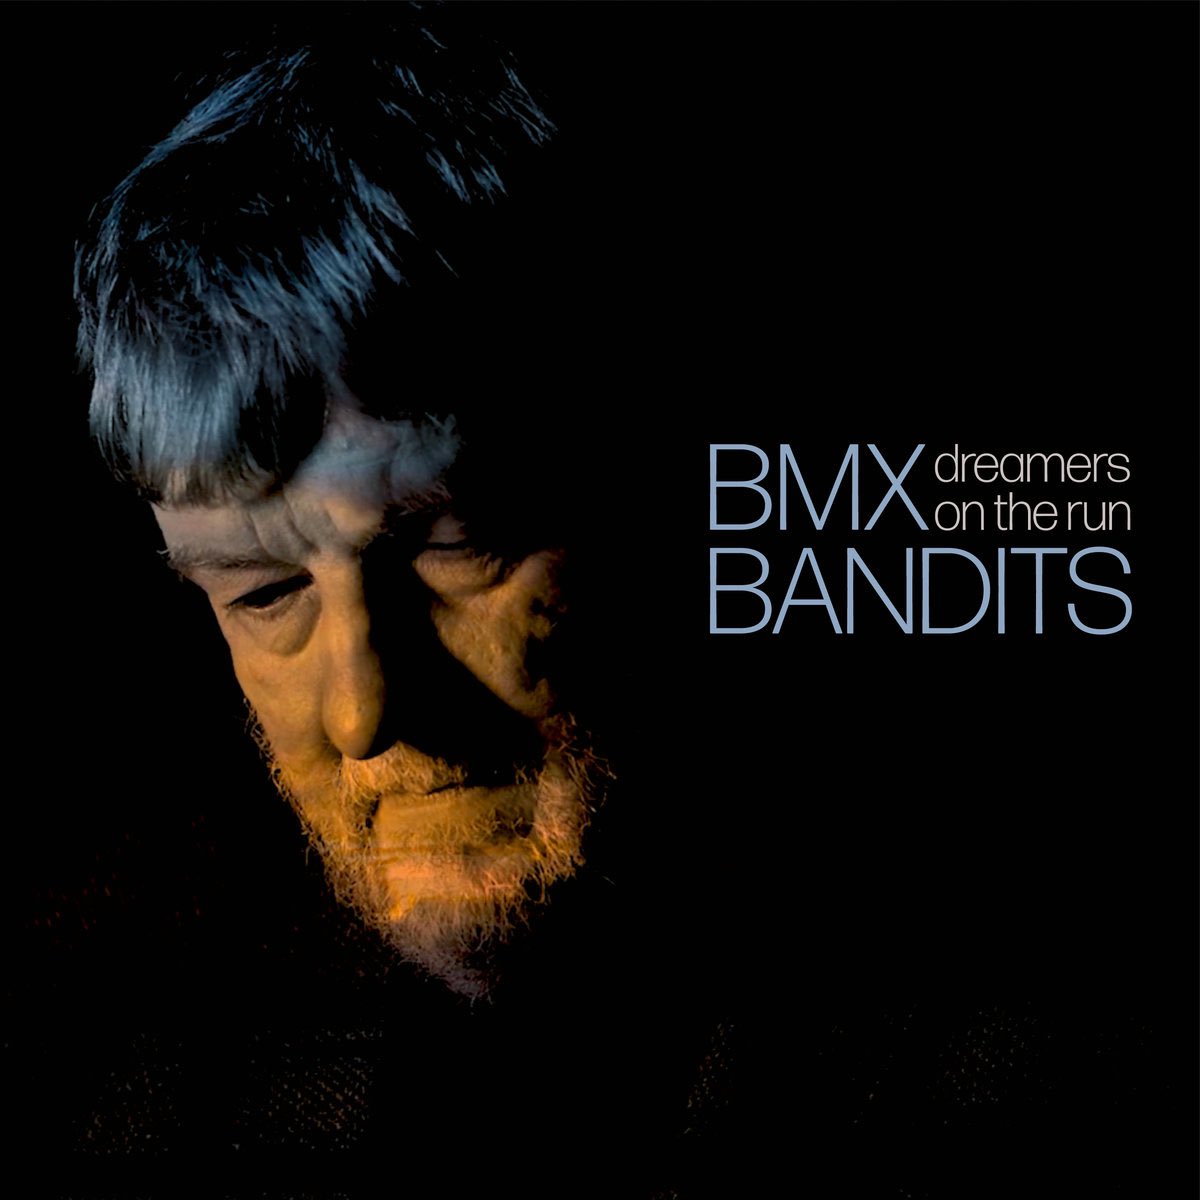 Ahead of the release of Dreamers On The Run, the new album by BMX Bandits, chief bandit @DuglasTStewart has written a brilliant blog for us on 6 albums that inspired the album. glasgowmusiccitytours.com/blog/six-album… @MusicNewsScot @VicGalloway @Monorail_Music